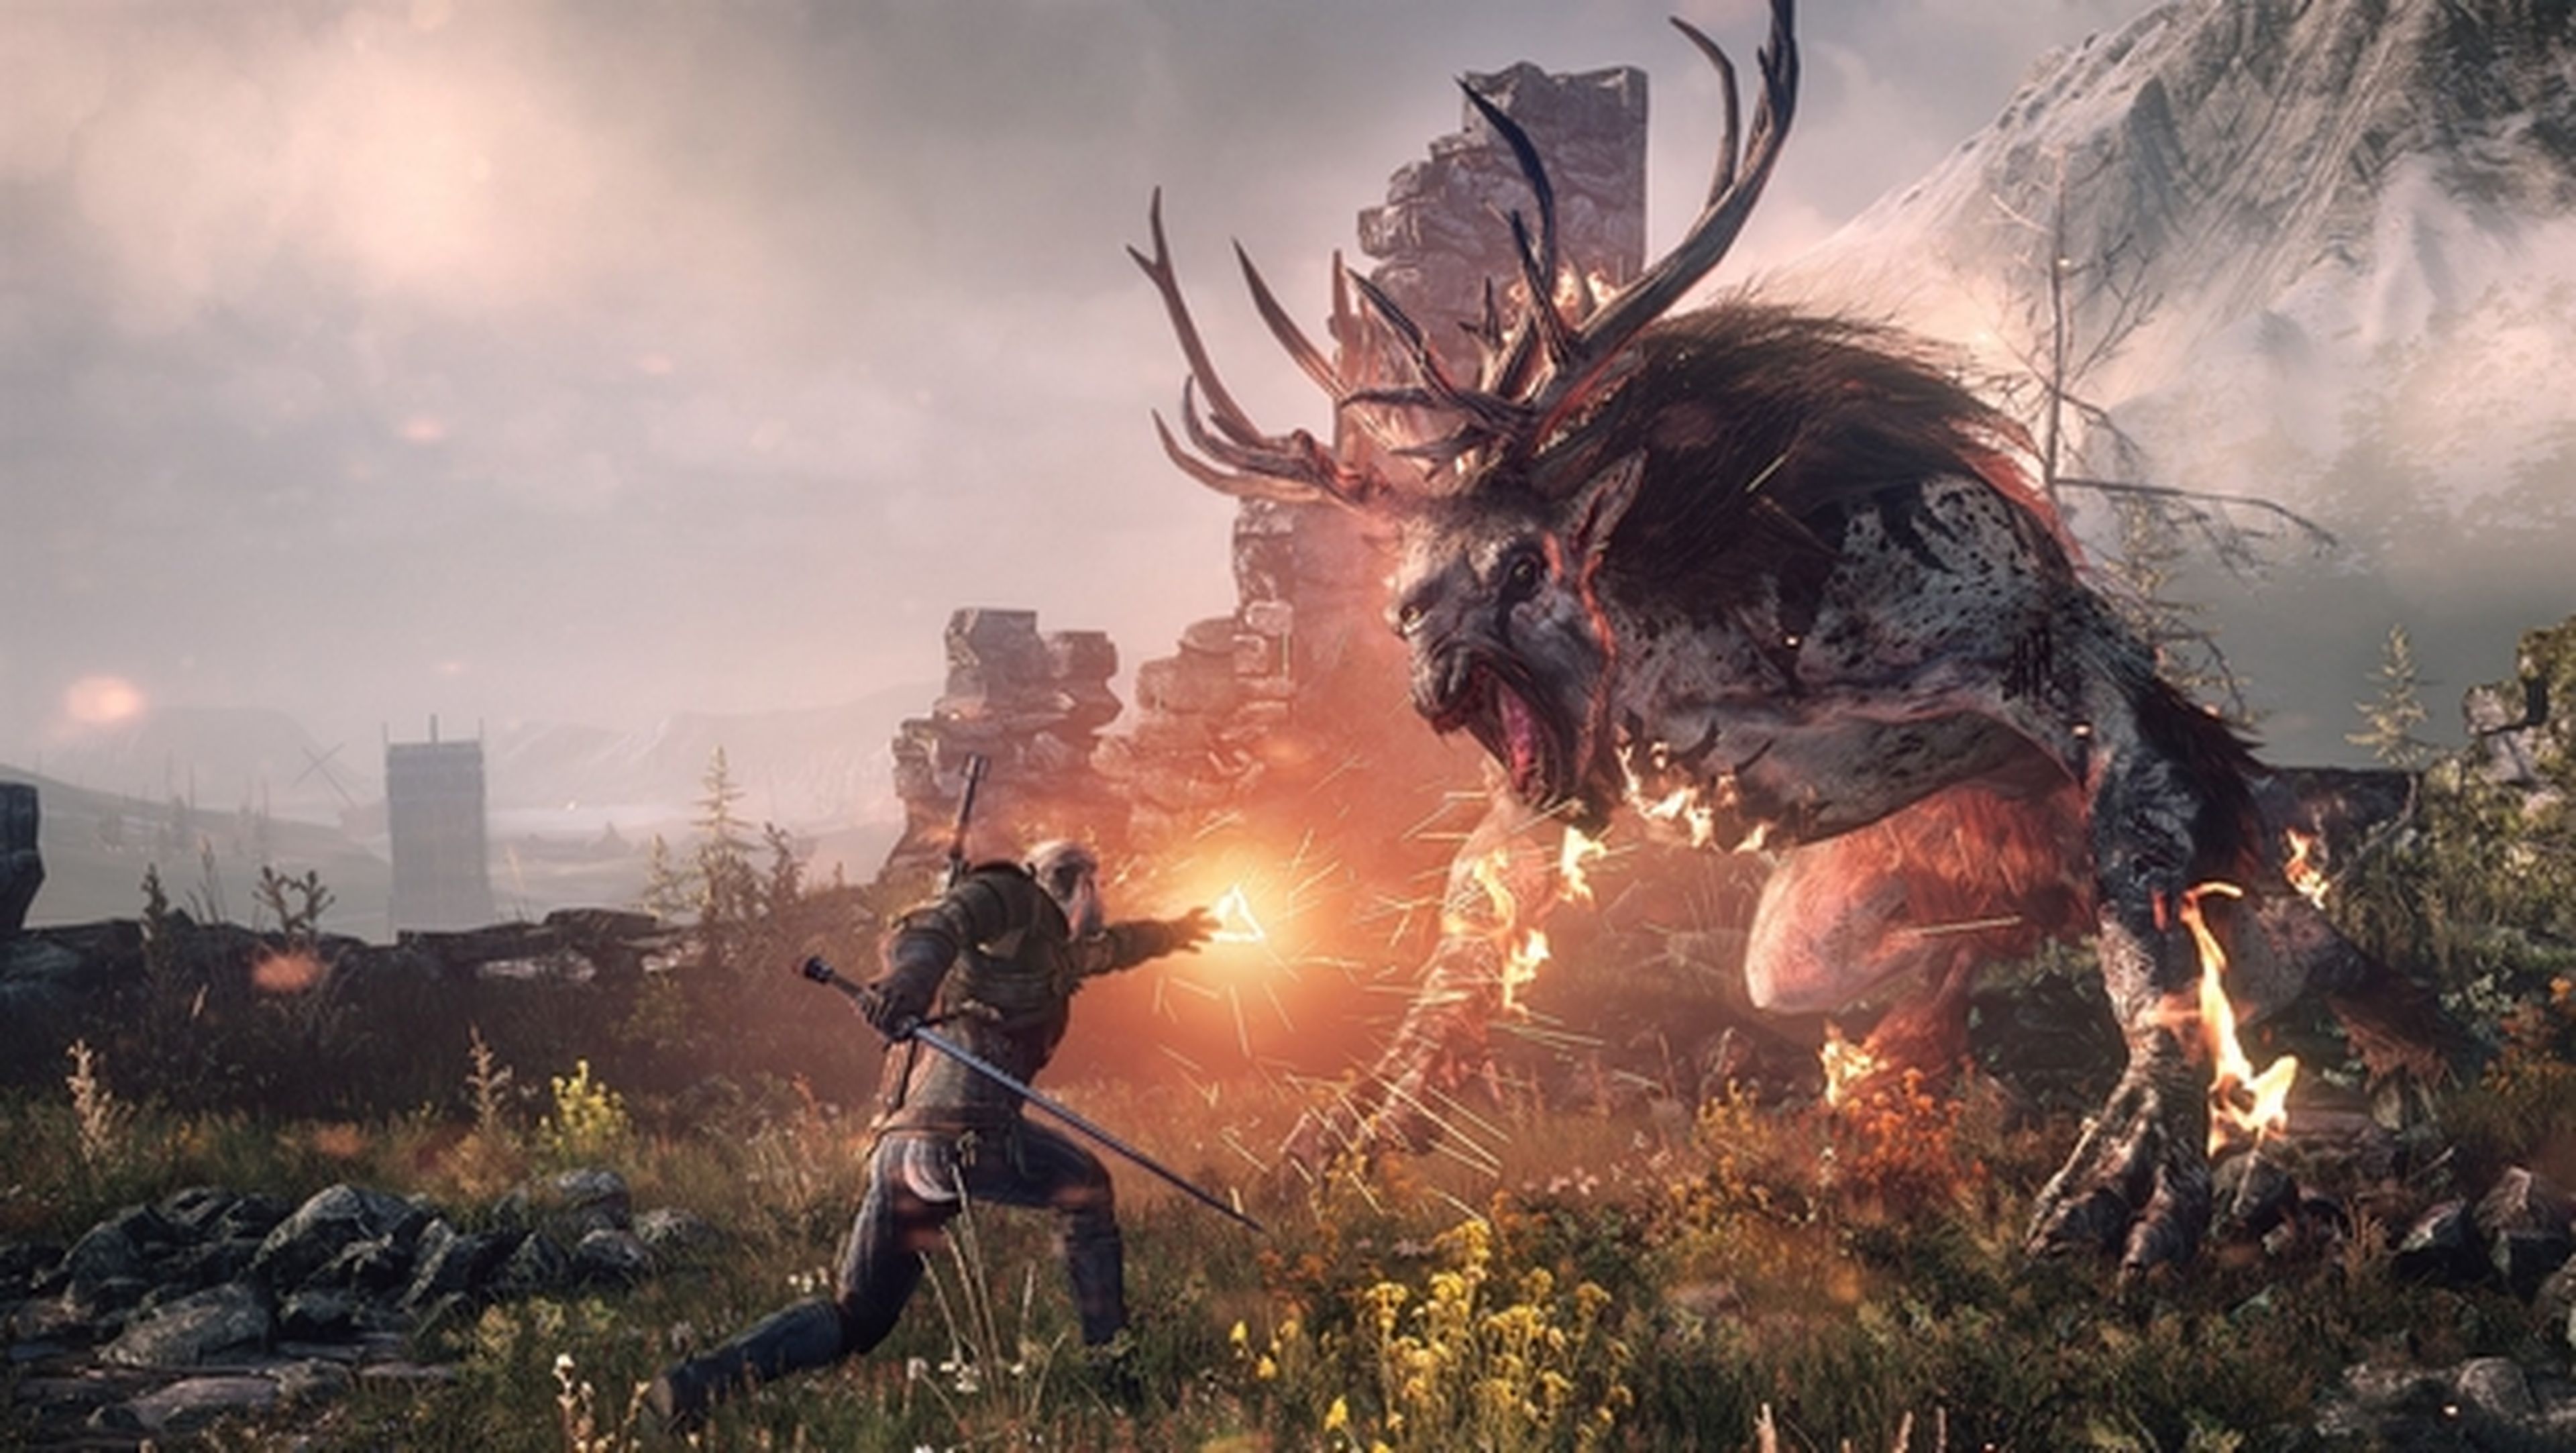 The Witcher III: Wild Hunt. PC, PS4, Xbox One.